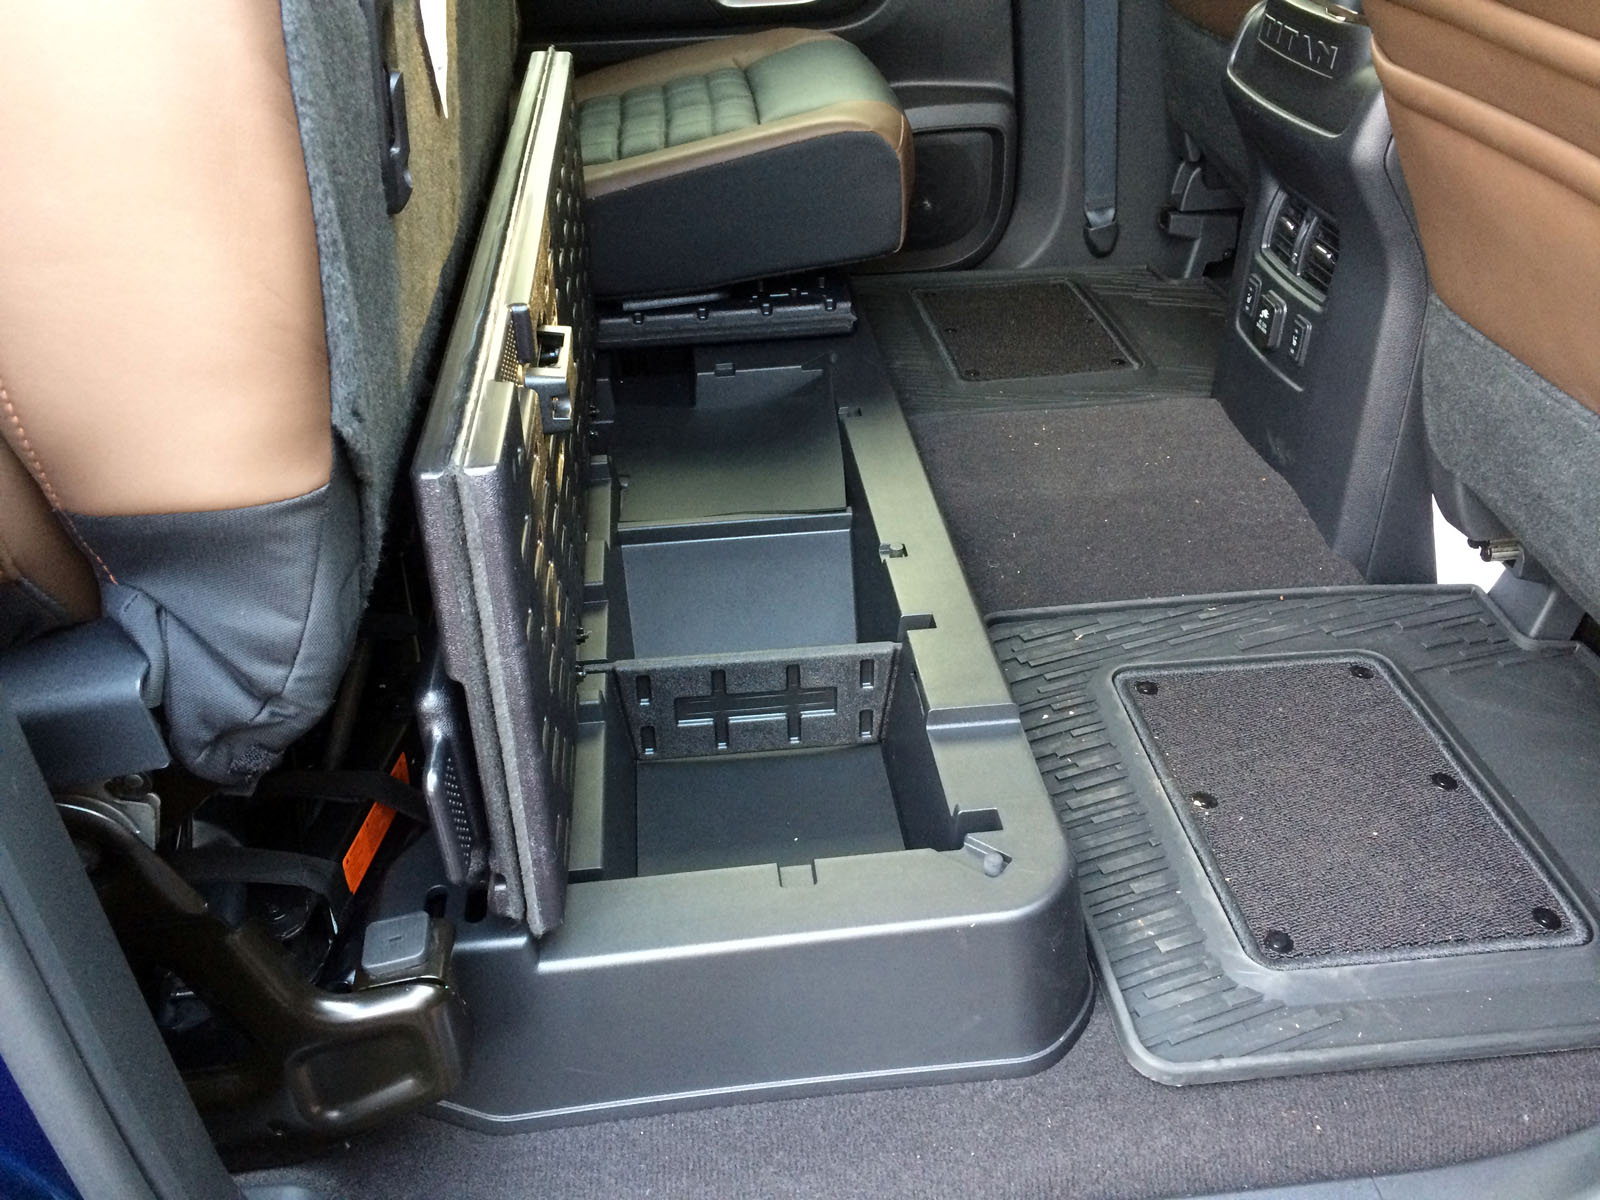 The truck includes some lockable storage under the rear bench, but the floor isn’t flat for larger, taller items like in some of the other trucks. There is a tray that lays down to a have a flat surface. (WTOP/ Mike Parris)